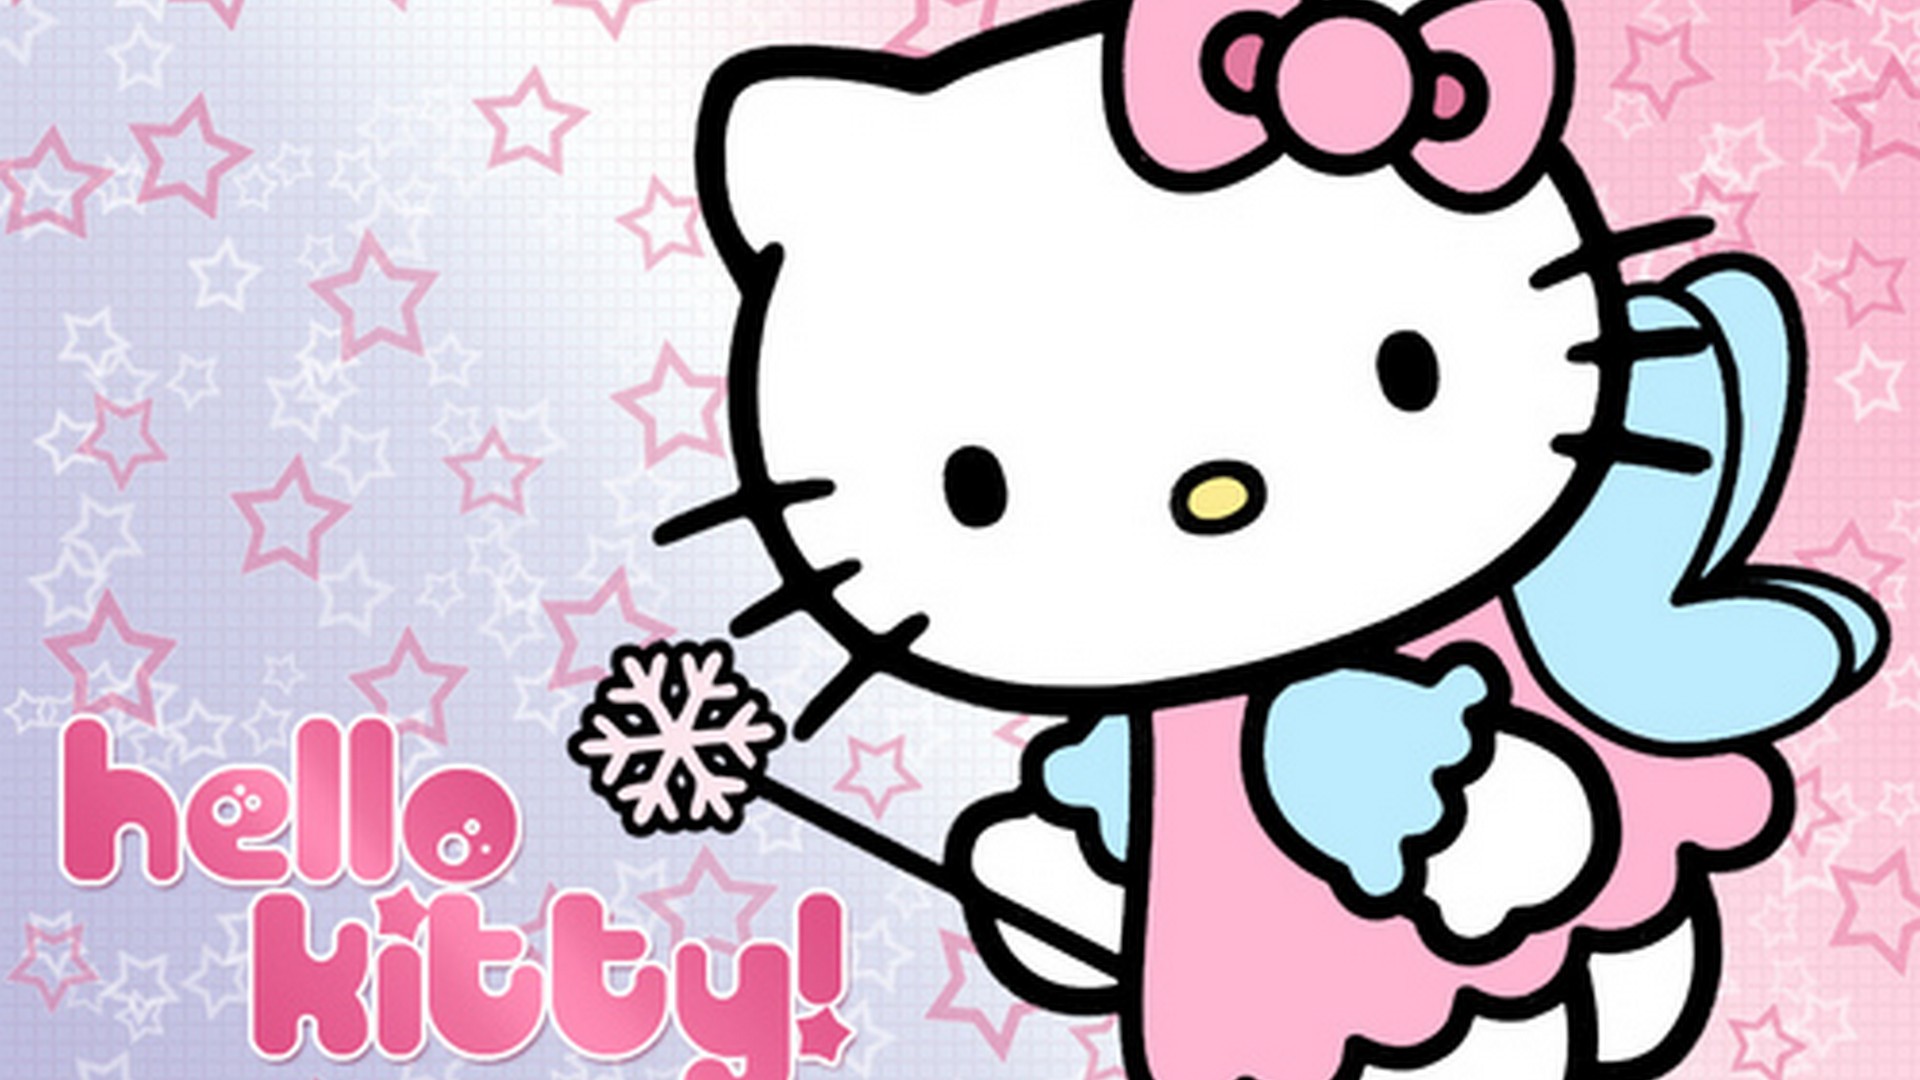 Wallpaper HD Hello Kitty Images with image resolution 1920x1080 pixel. You can make this wallpaper for your Desktop Computer Backgrounds, Mac Wallpapers, Android Lock screen or iPhone Screensavers